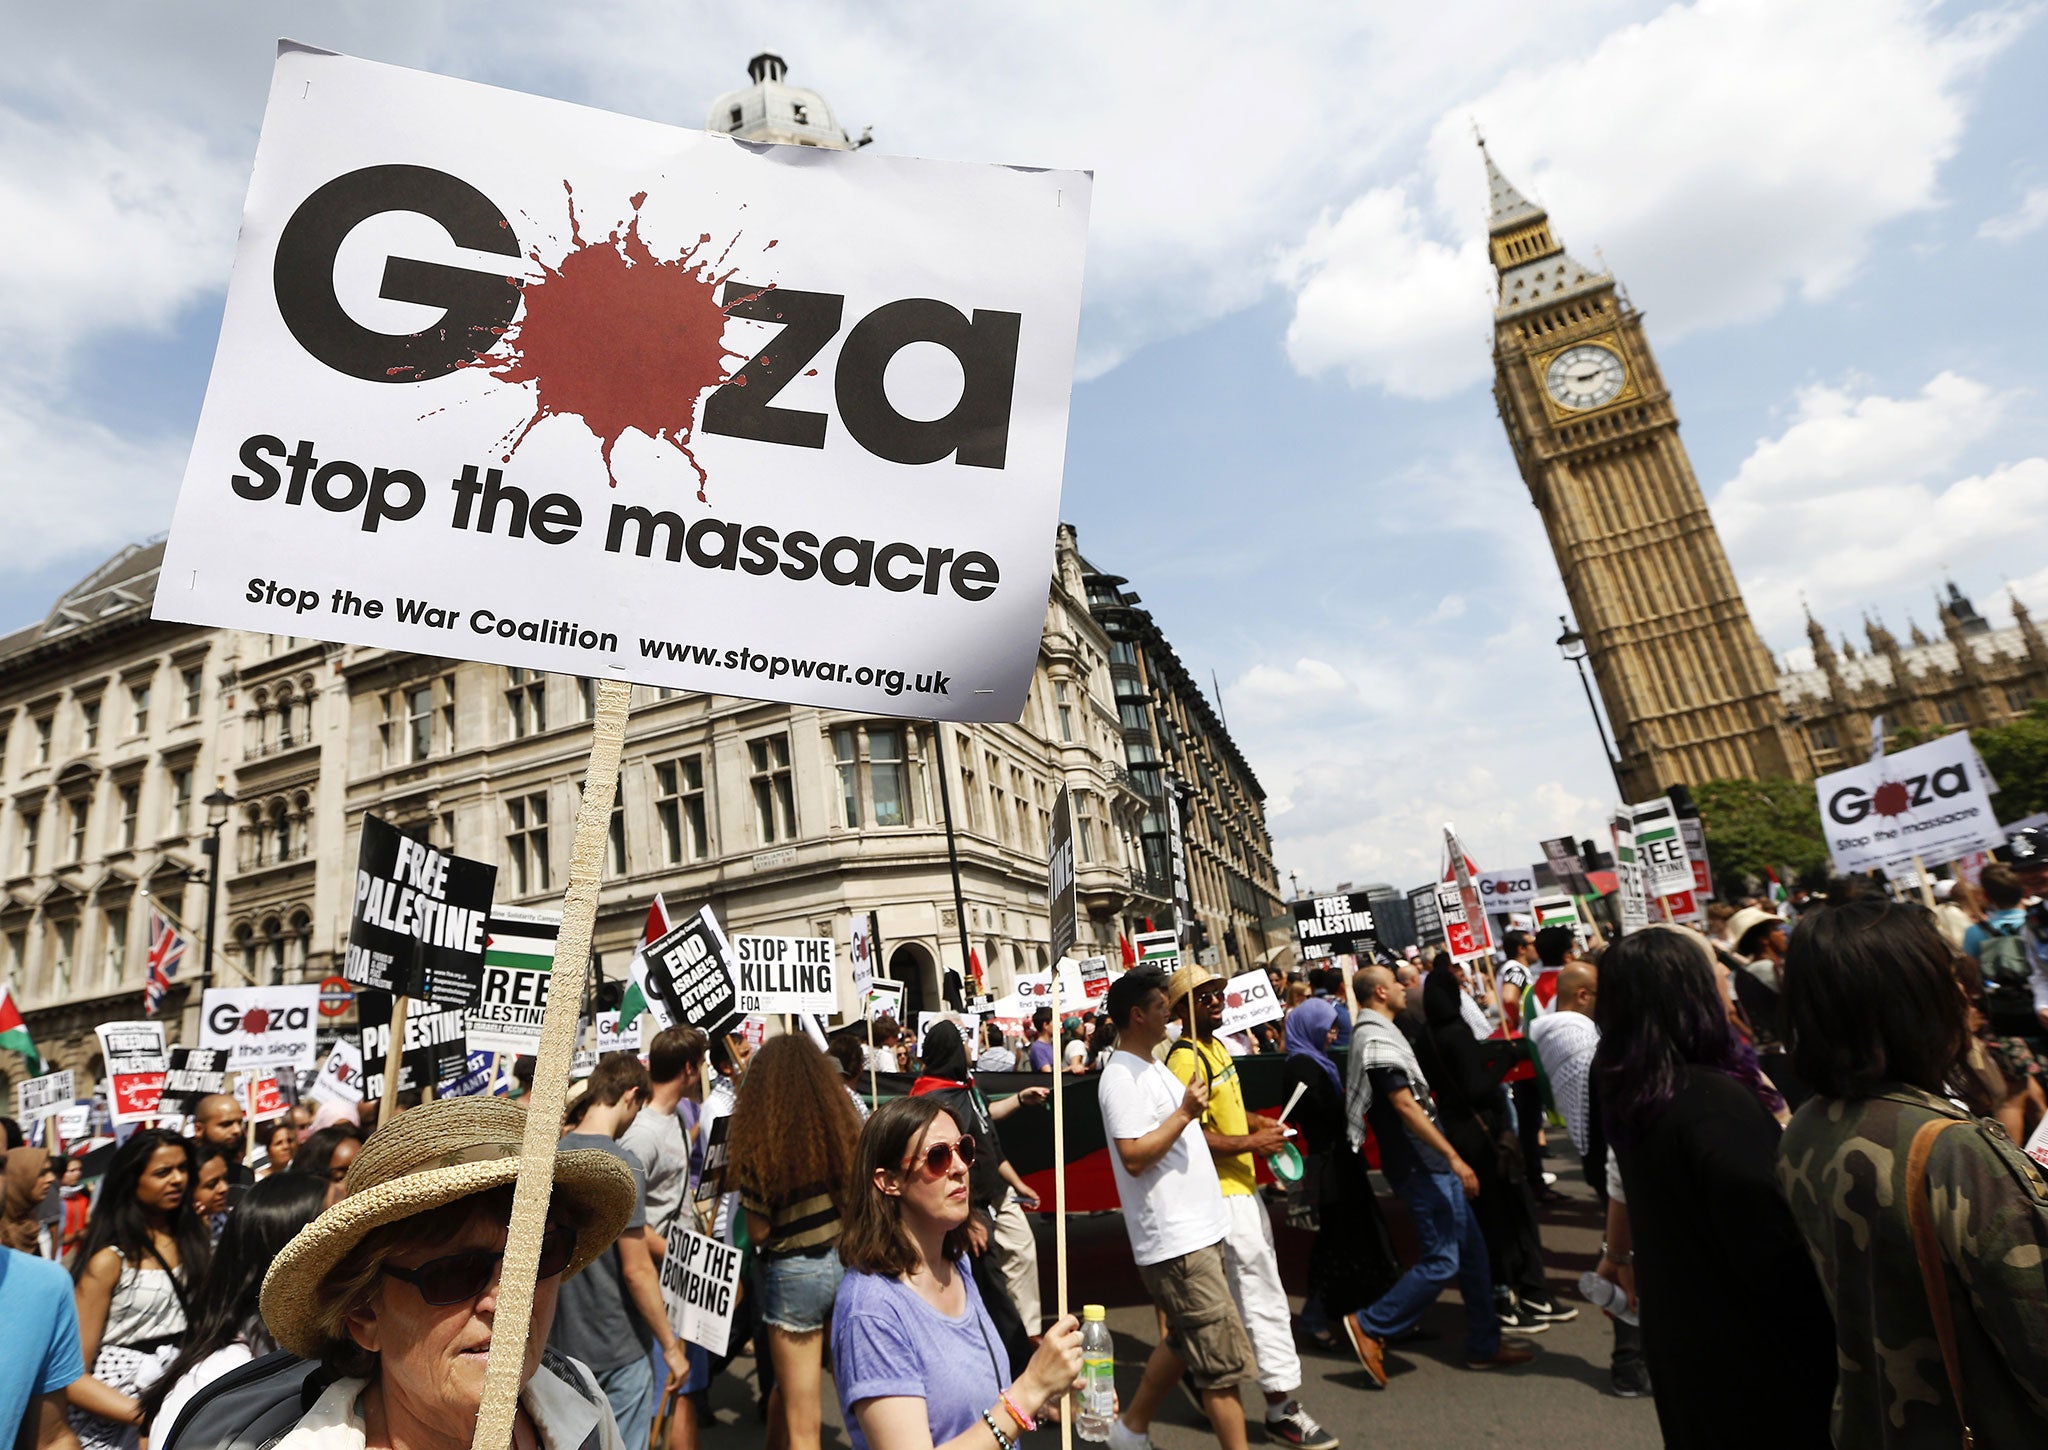 Demonstrators march through the streets from outside the Israeli embassy in central London on July 26, 2014, calling for an end to violence in Gaza.